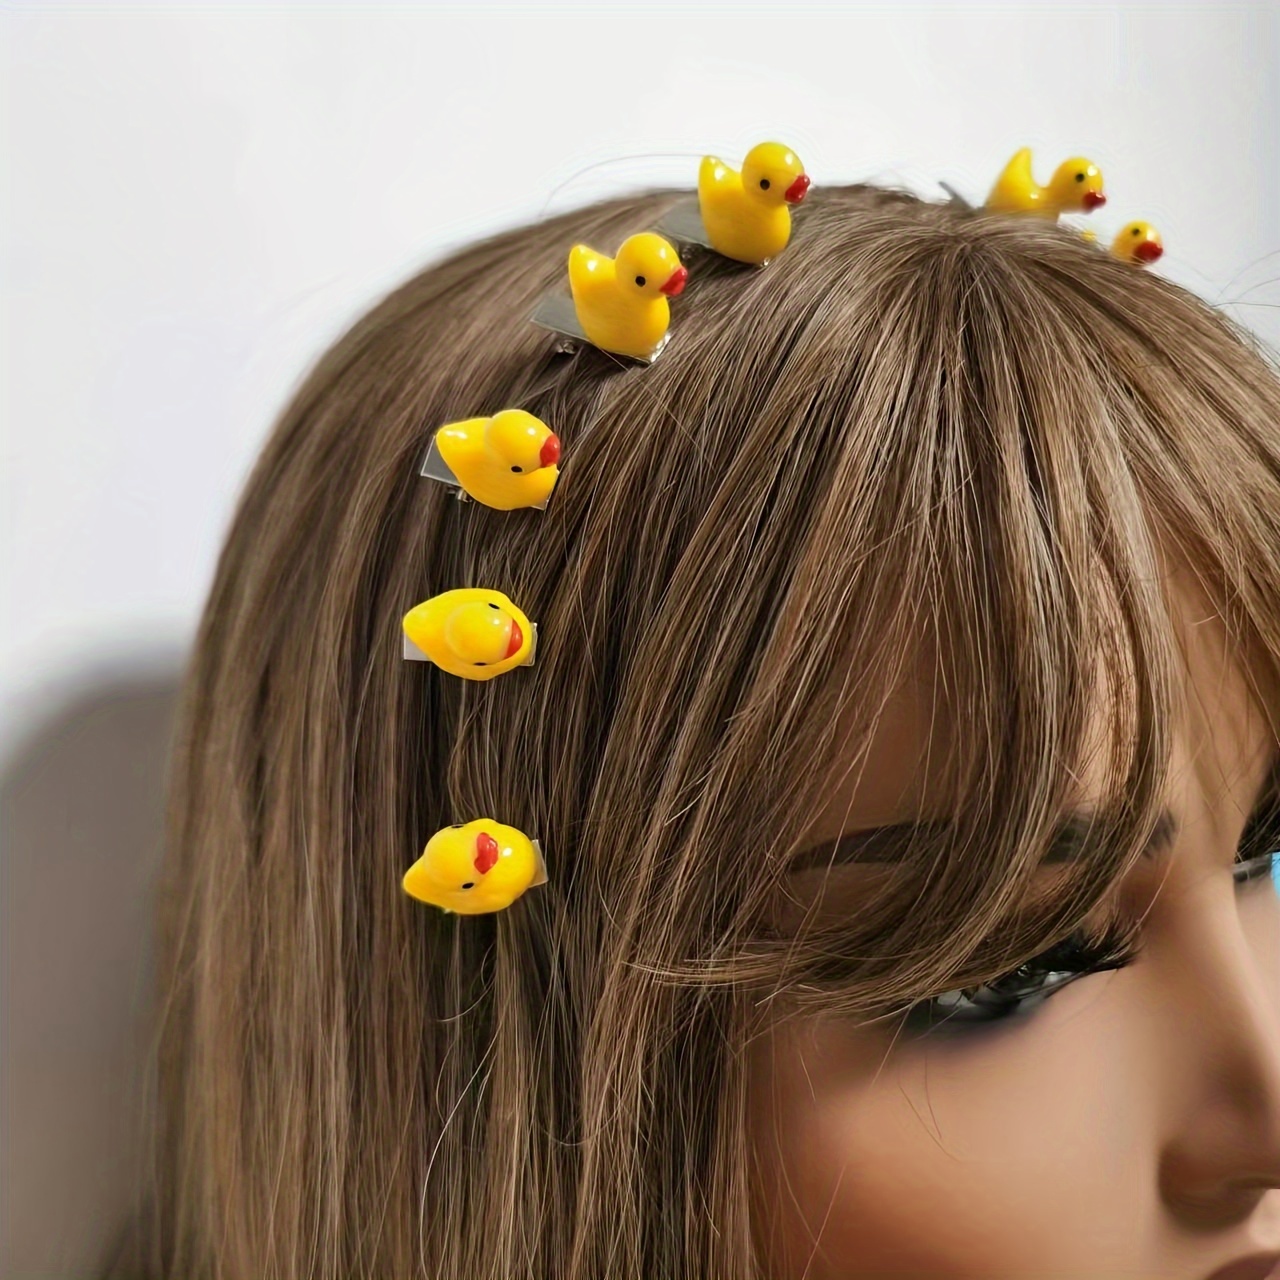 

10 Pcs Cute Cartoon Duck Hair Clips - Plastic, One-size-fits-all, Animal Print, Suitable For Ages 14 And Up